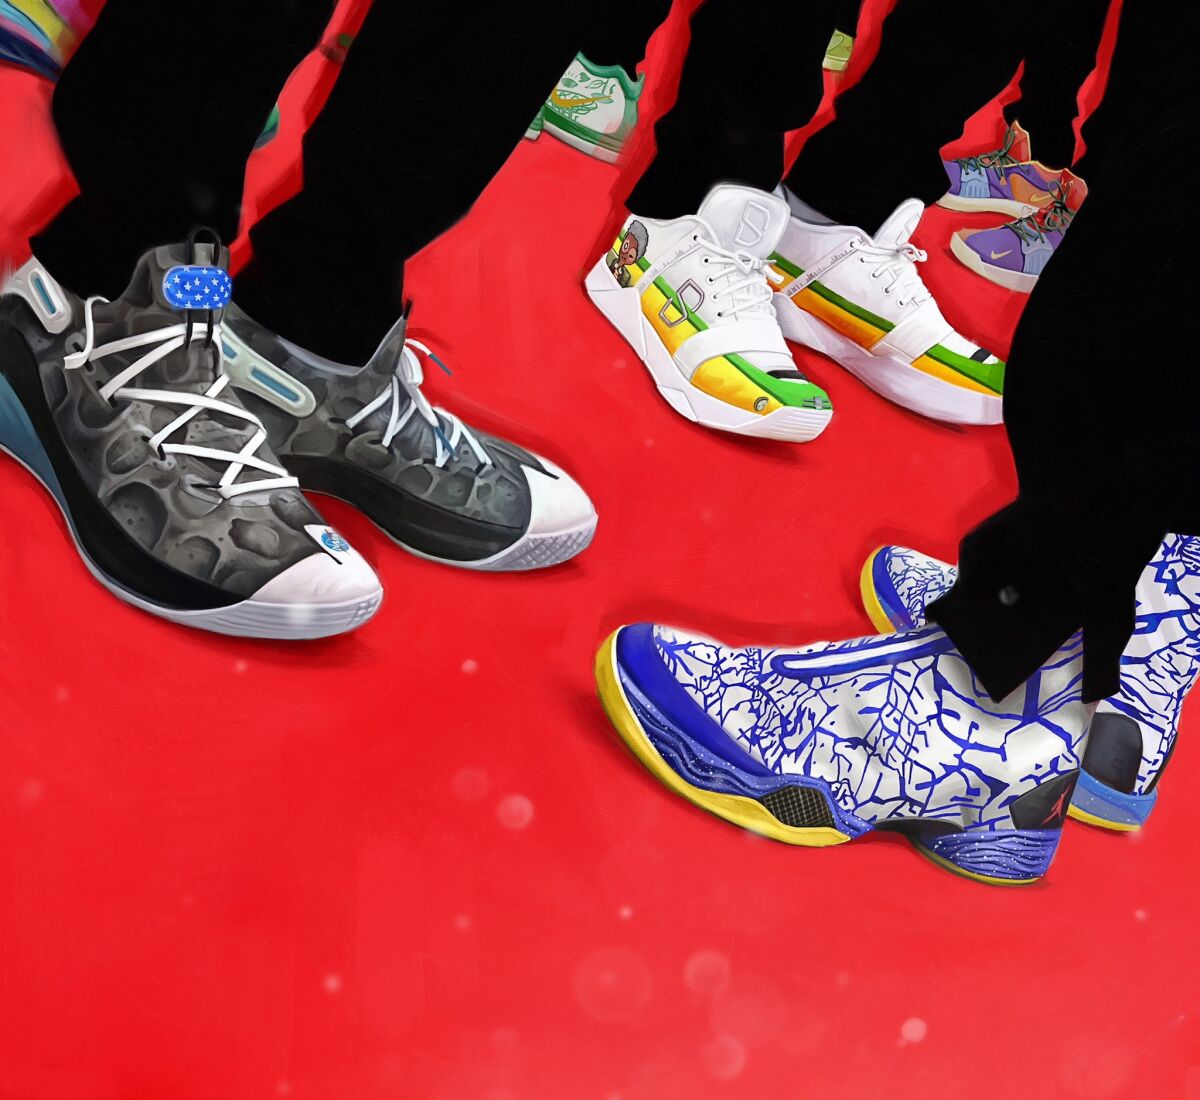 Illustration of sneakers on the red carpet.